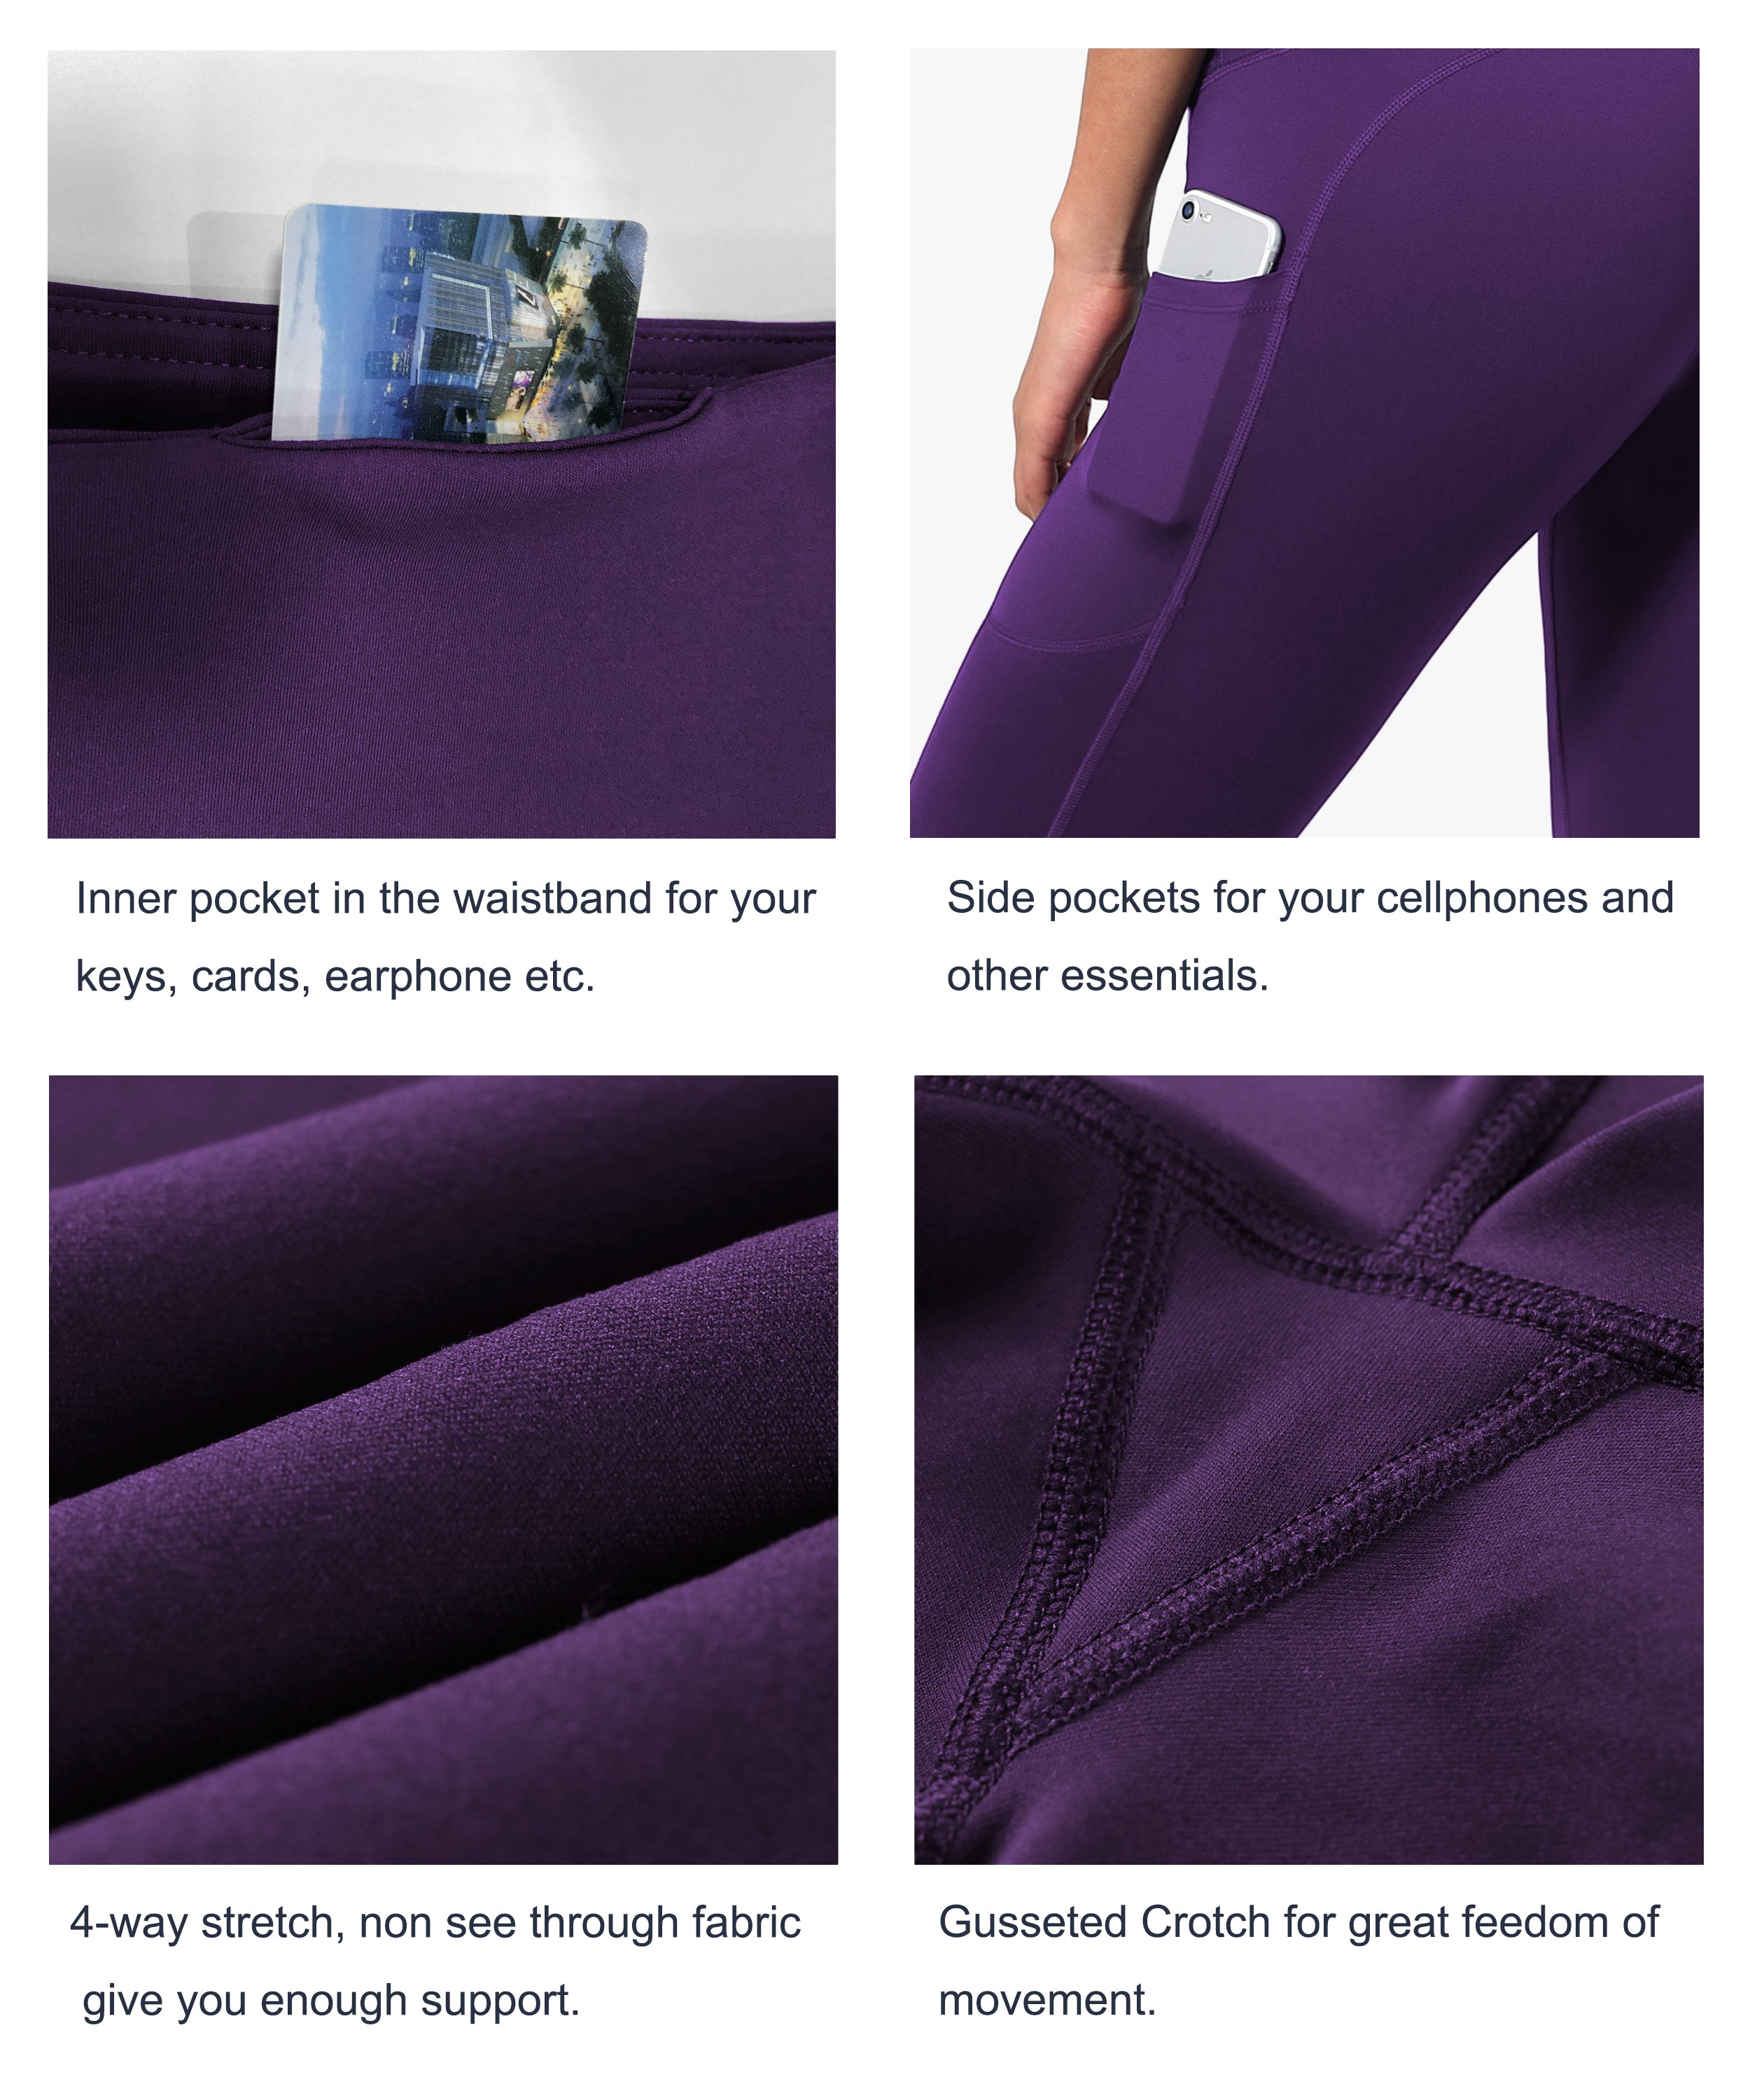 Hip Line Side Pockets Gym Pants eggplantpurple Sexy Hip Line Side Pockets 75%Nylon/25%Spandex Fabric doesn't attract lint easily 4-way stretch No see-through Moisture-wicking Tummy control Inner pocket Two lengths